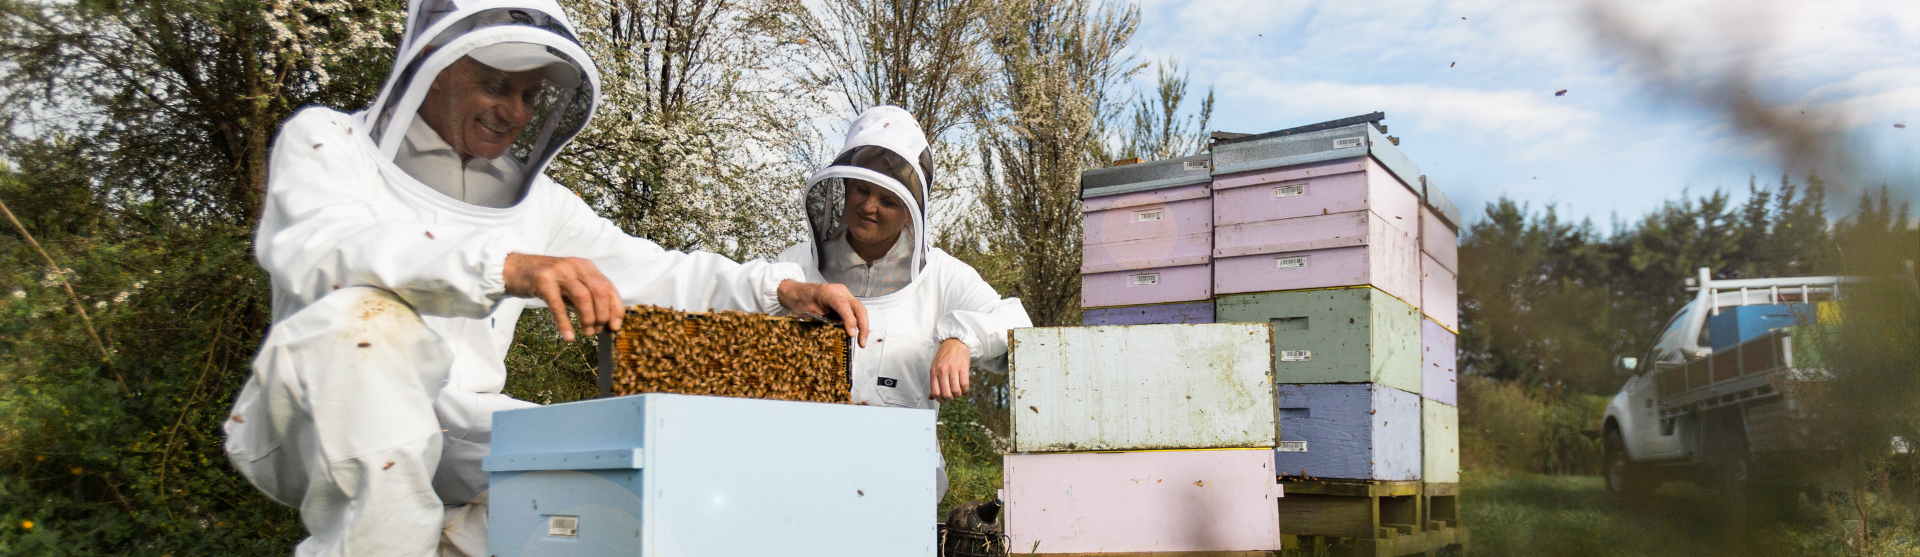 A man in a protective costume holding a hive next to a honey bee farm, while a woman in a protective costume observes the process.